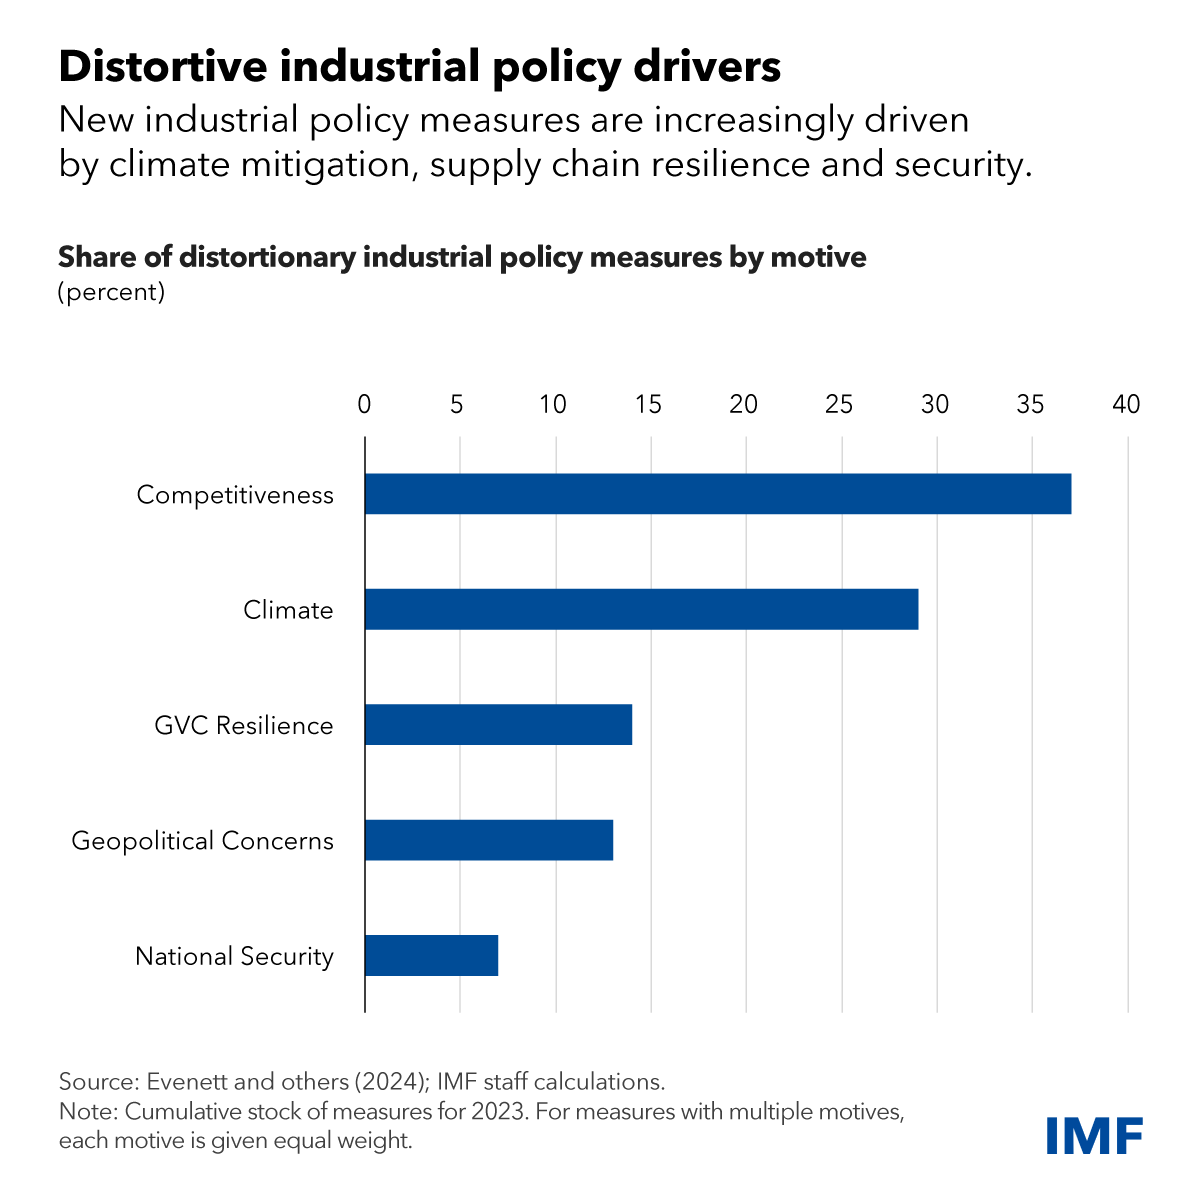 New industrial policy measures—targeted government interventions—are increasingly driven by climate mitigation, supply chain resilience, and security. Read more in our blog. imf.org/en/Blogs/Artic…